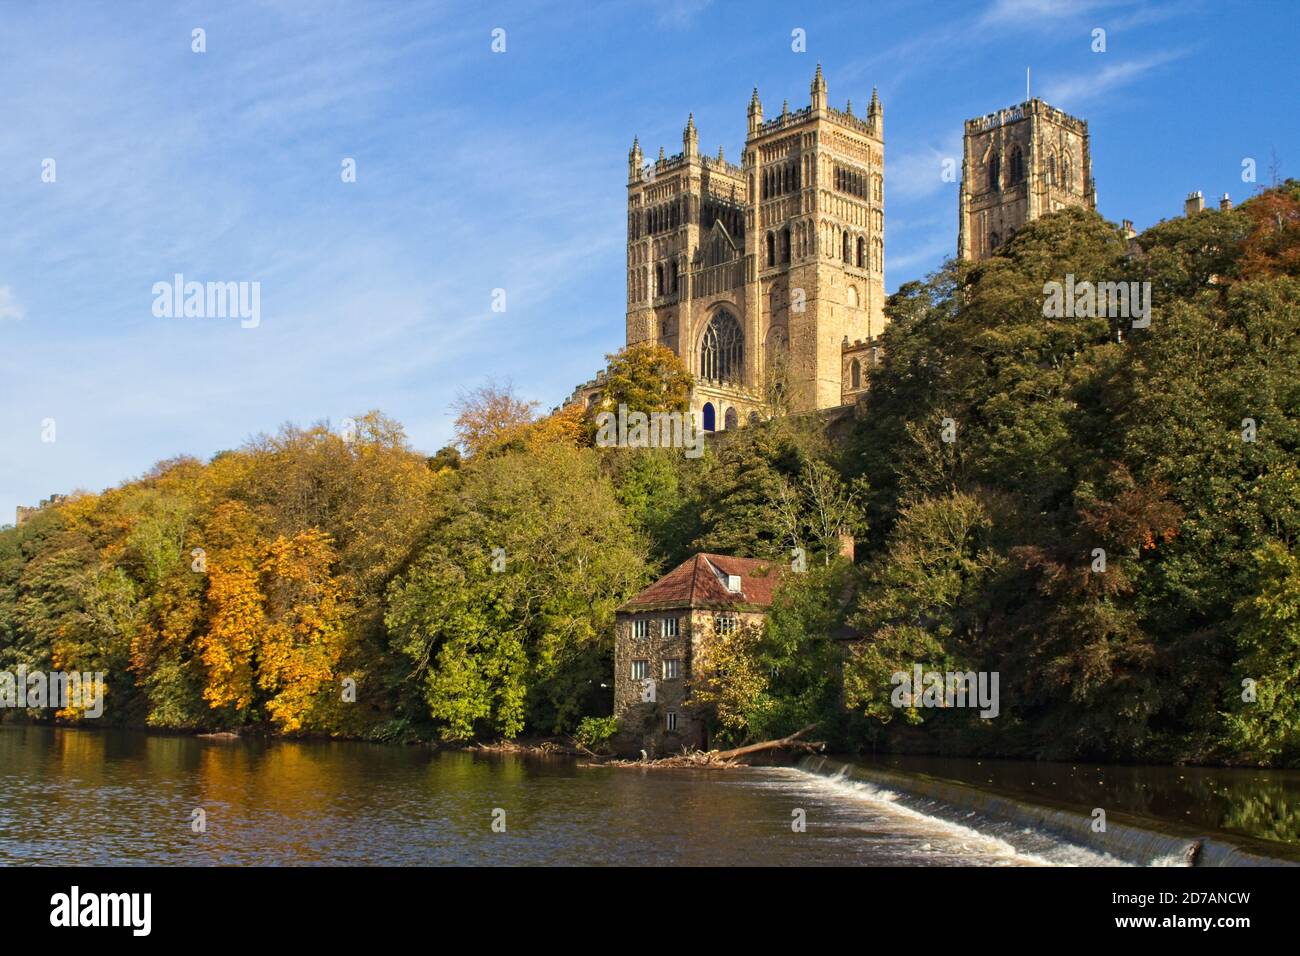 The landmark Durham Cathedral stands high above the River Wear in the city of Durham in the north east of England. Captured in autumn. Stock Photo